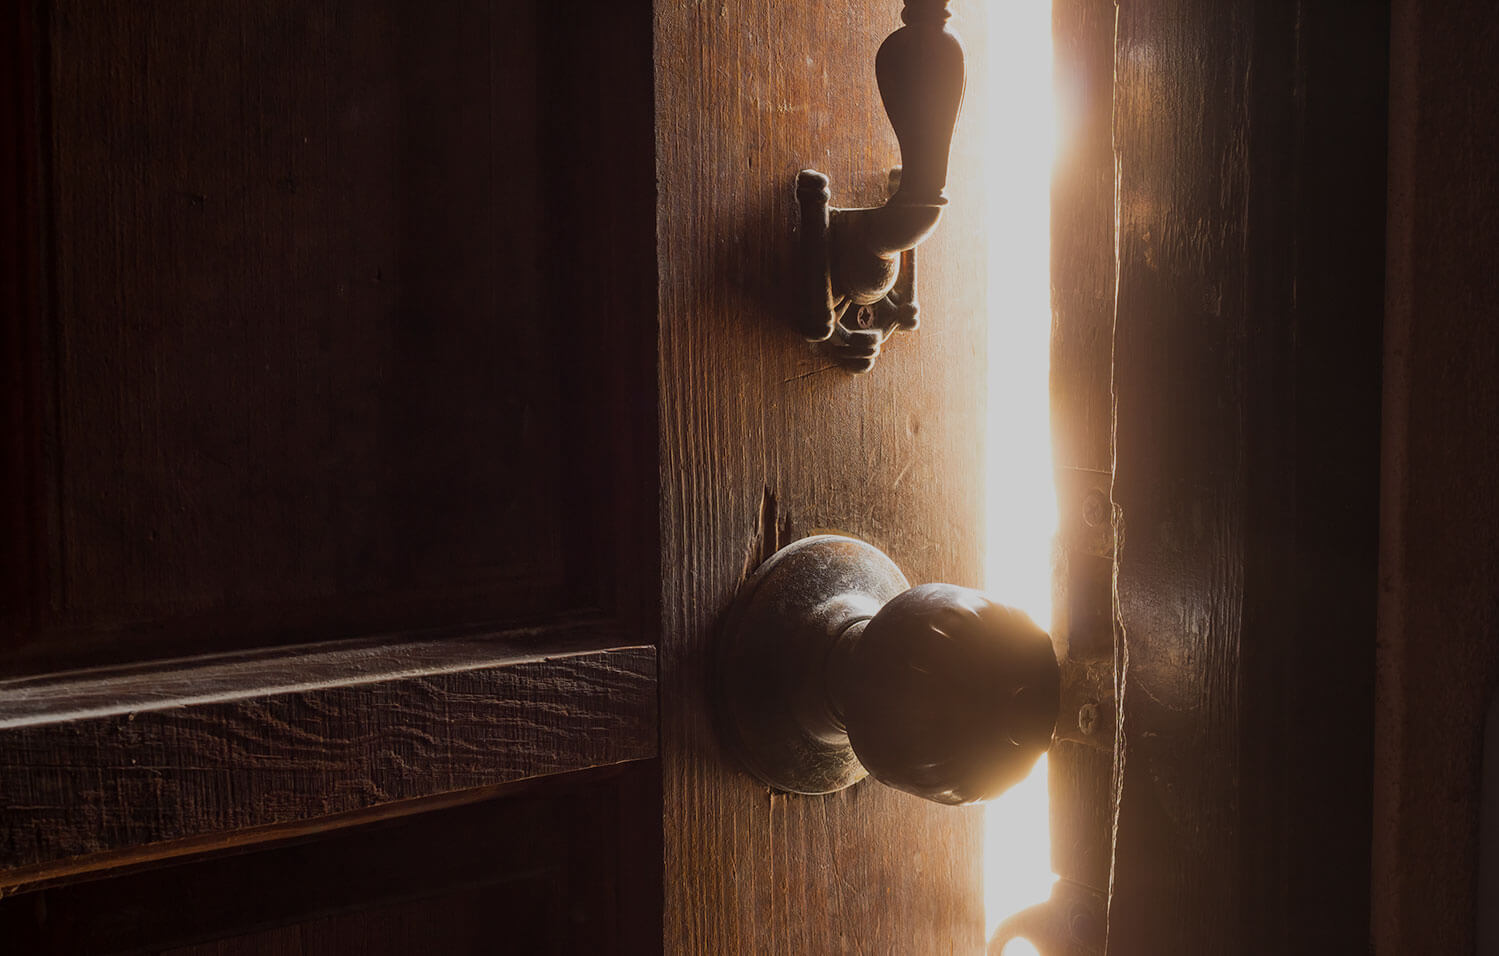 An old, worn wooden door is left slightly ajar, with sunlight streaming through